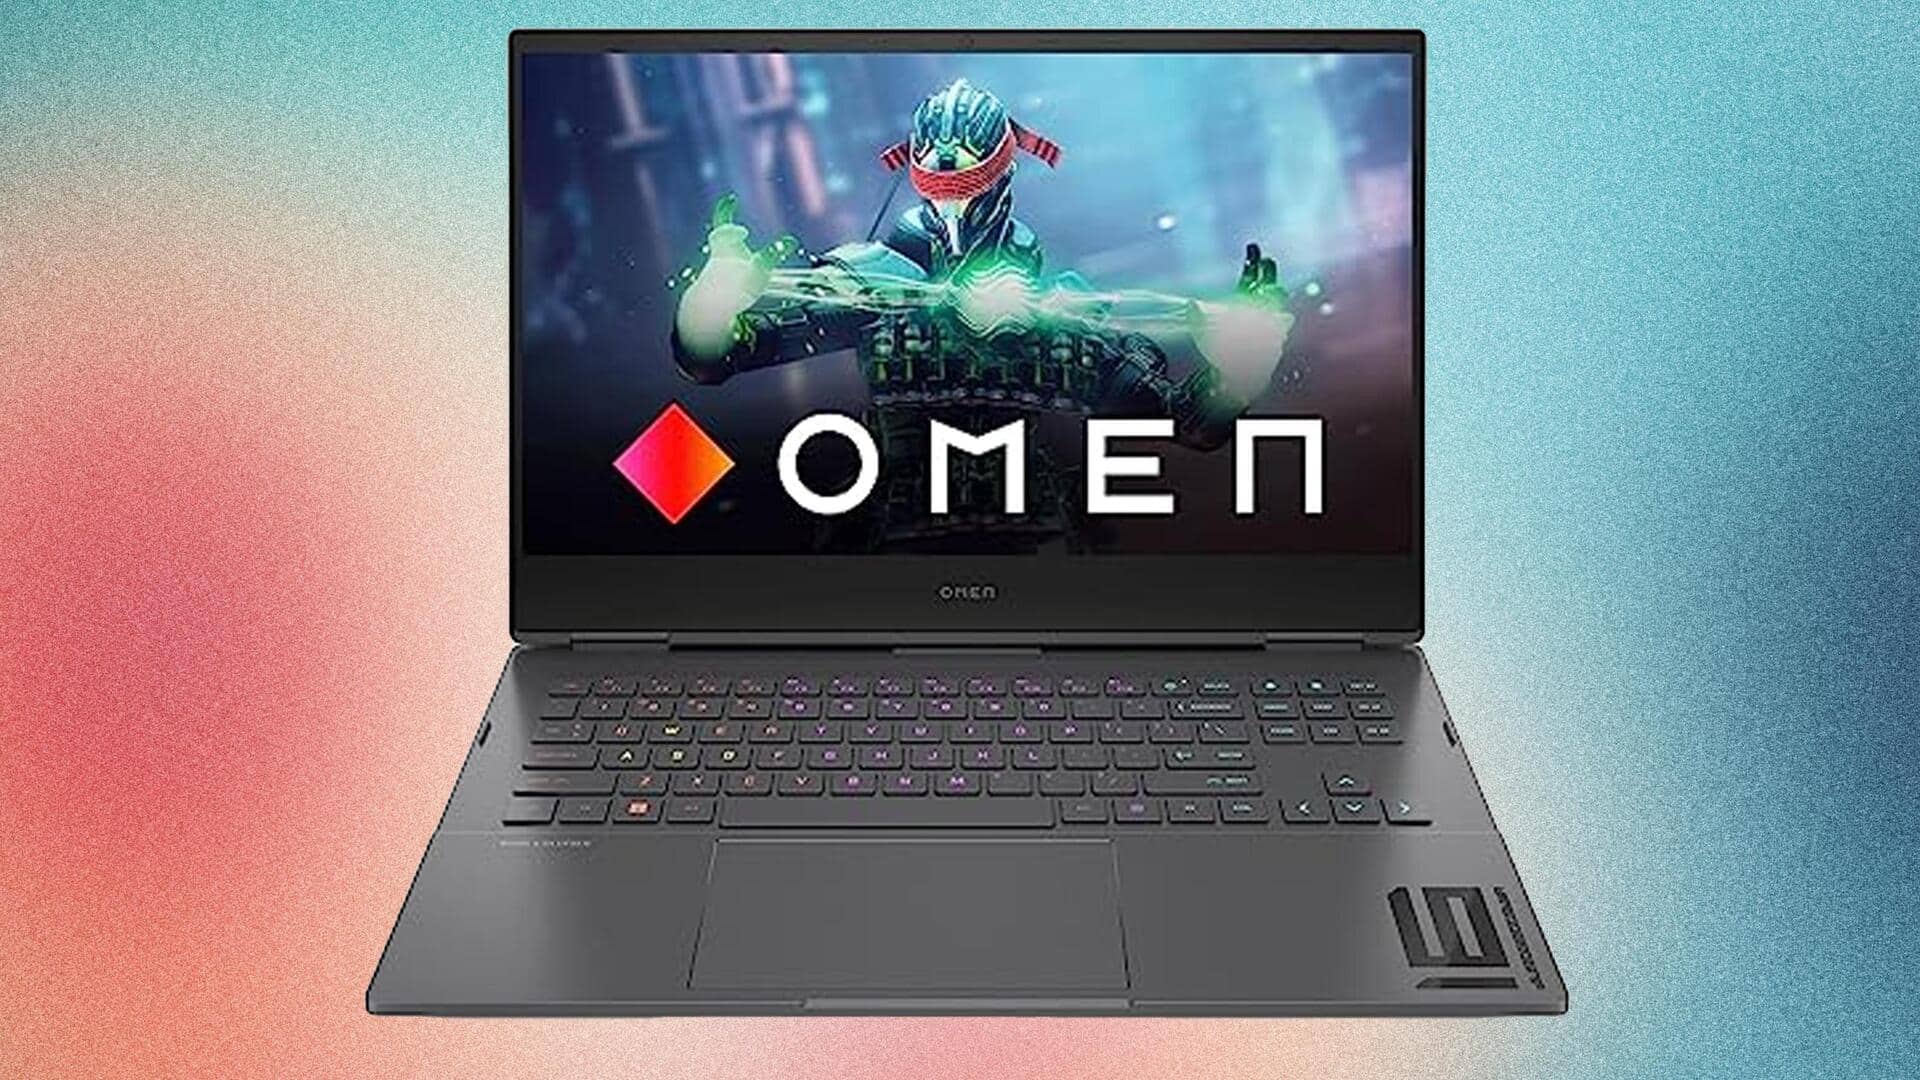 HP Omen 16 laptop gets cheaper on Amazon: Check offers